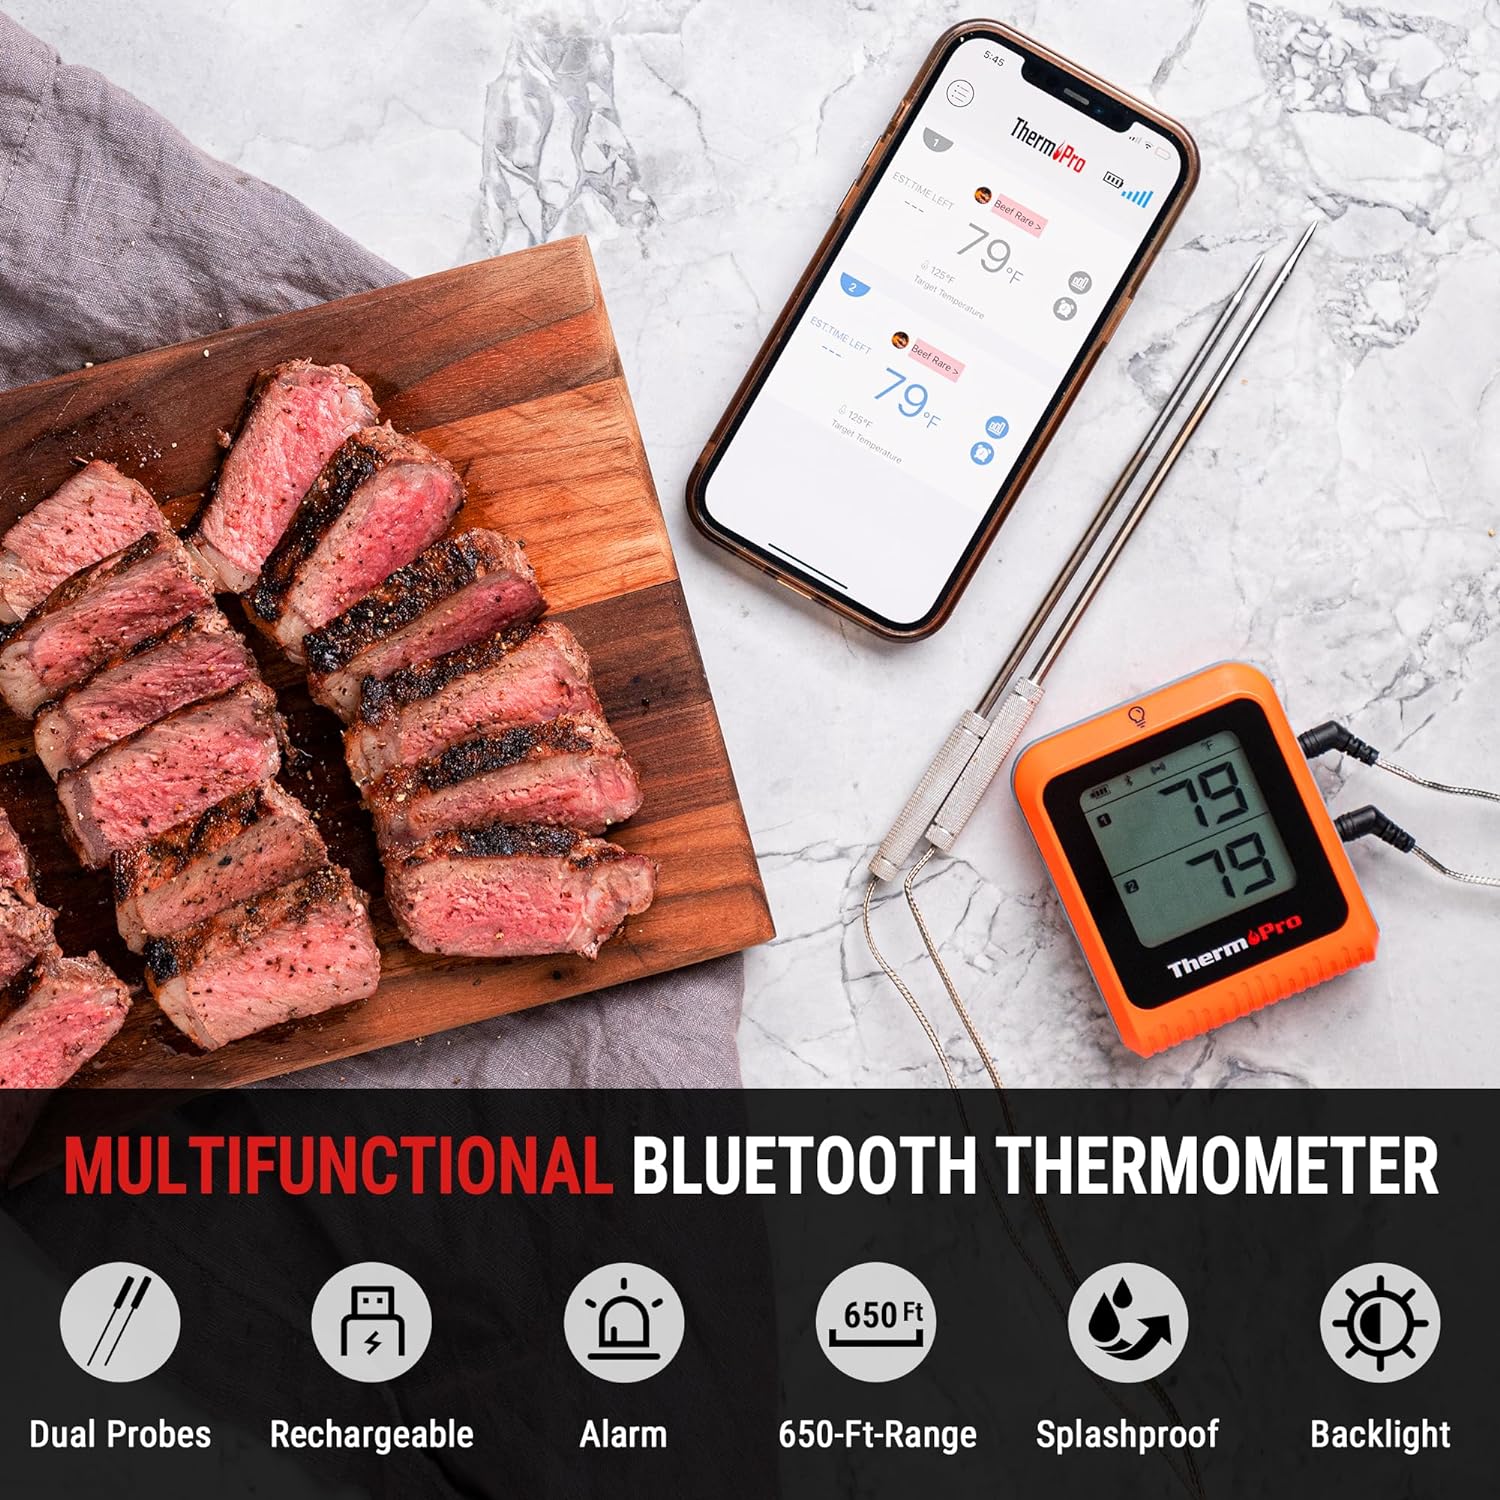 Wireless Meat Thermometer of 650FT for Smoker Oven, Bluetooth Grill Thermometer with Dual Probes, Smart Rechargeable BBQ thermometer for Cooking Turkey Fish Beef